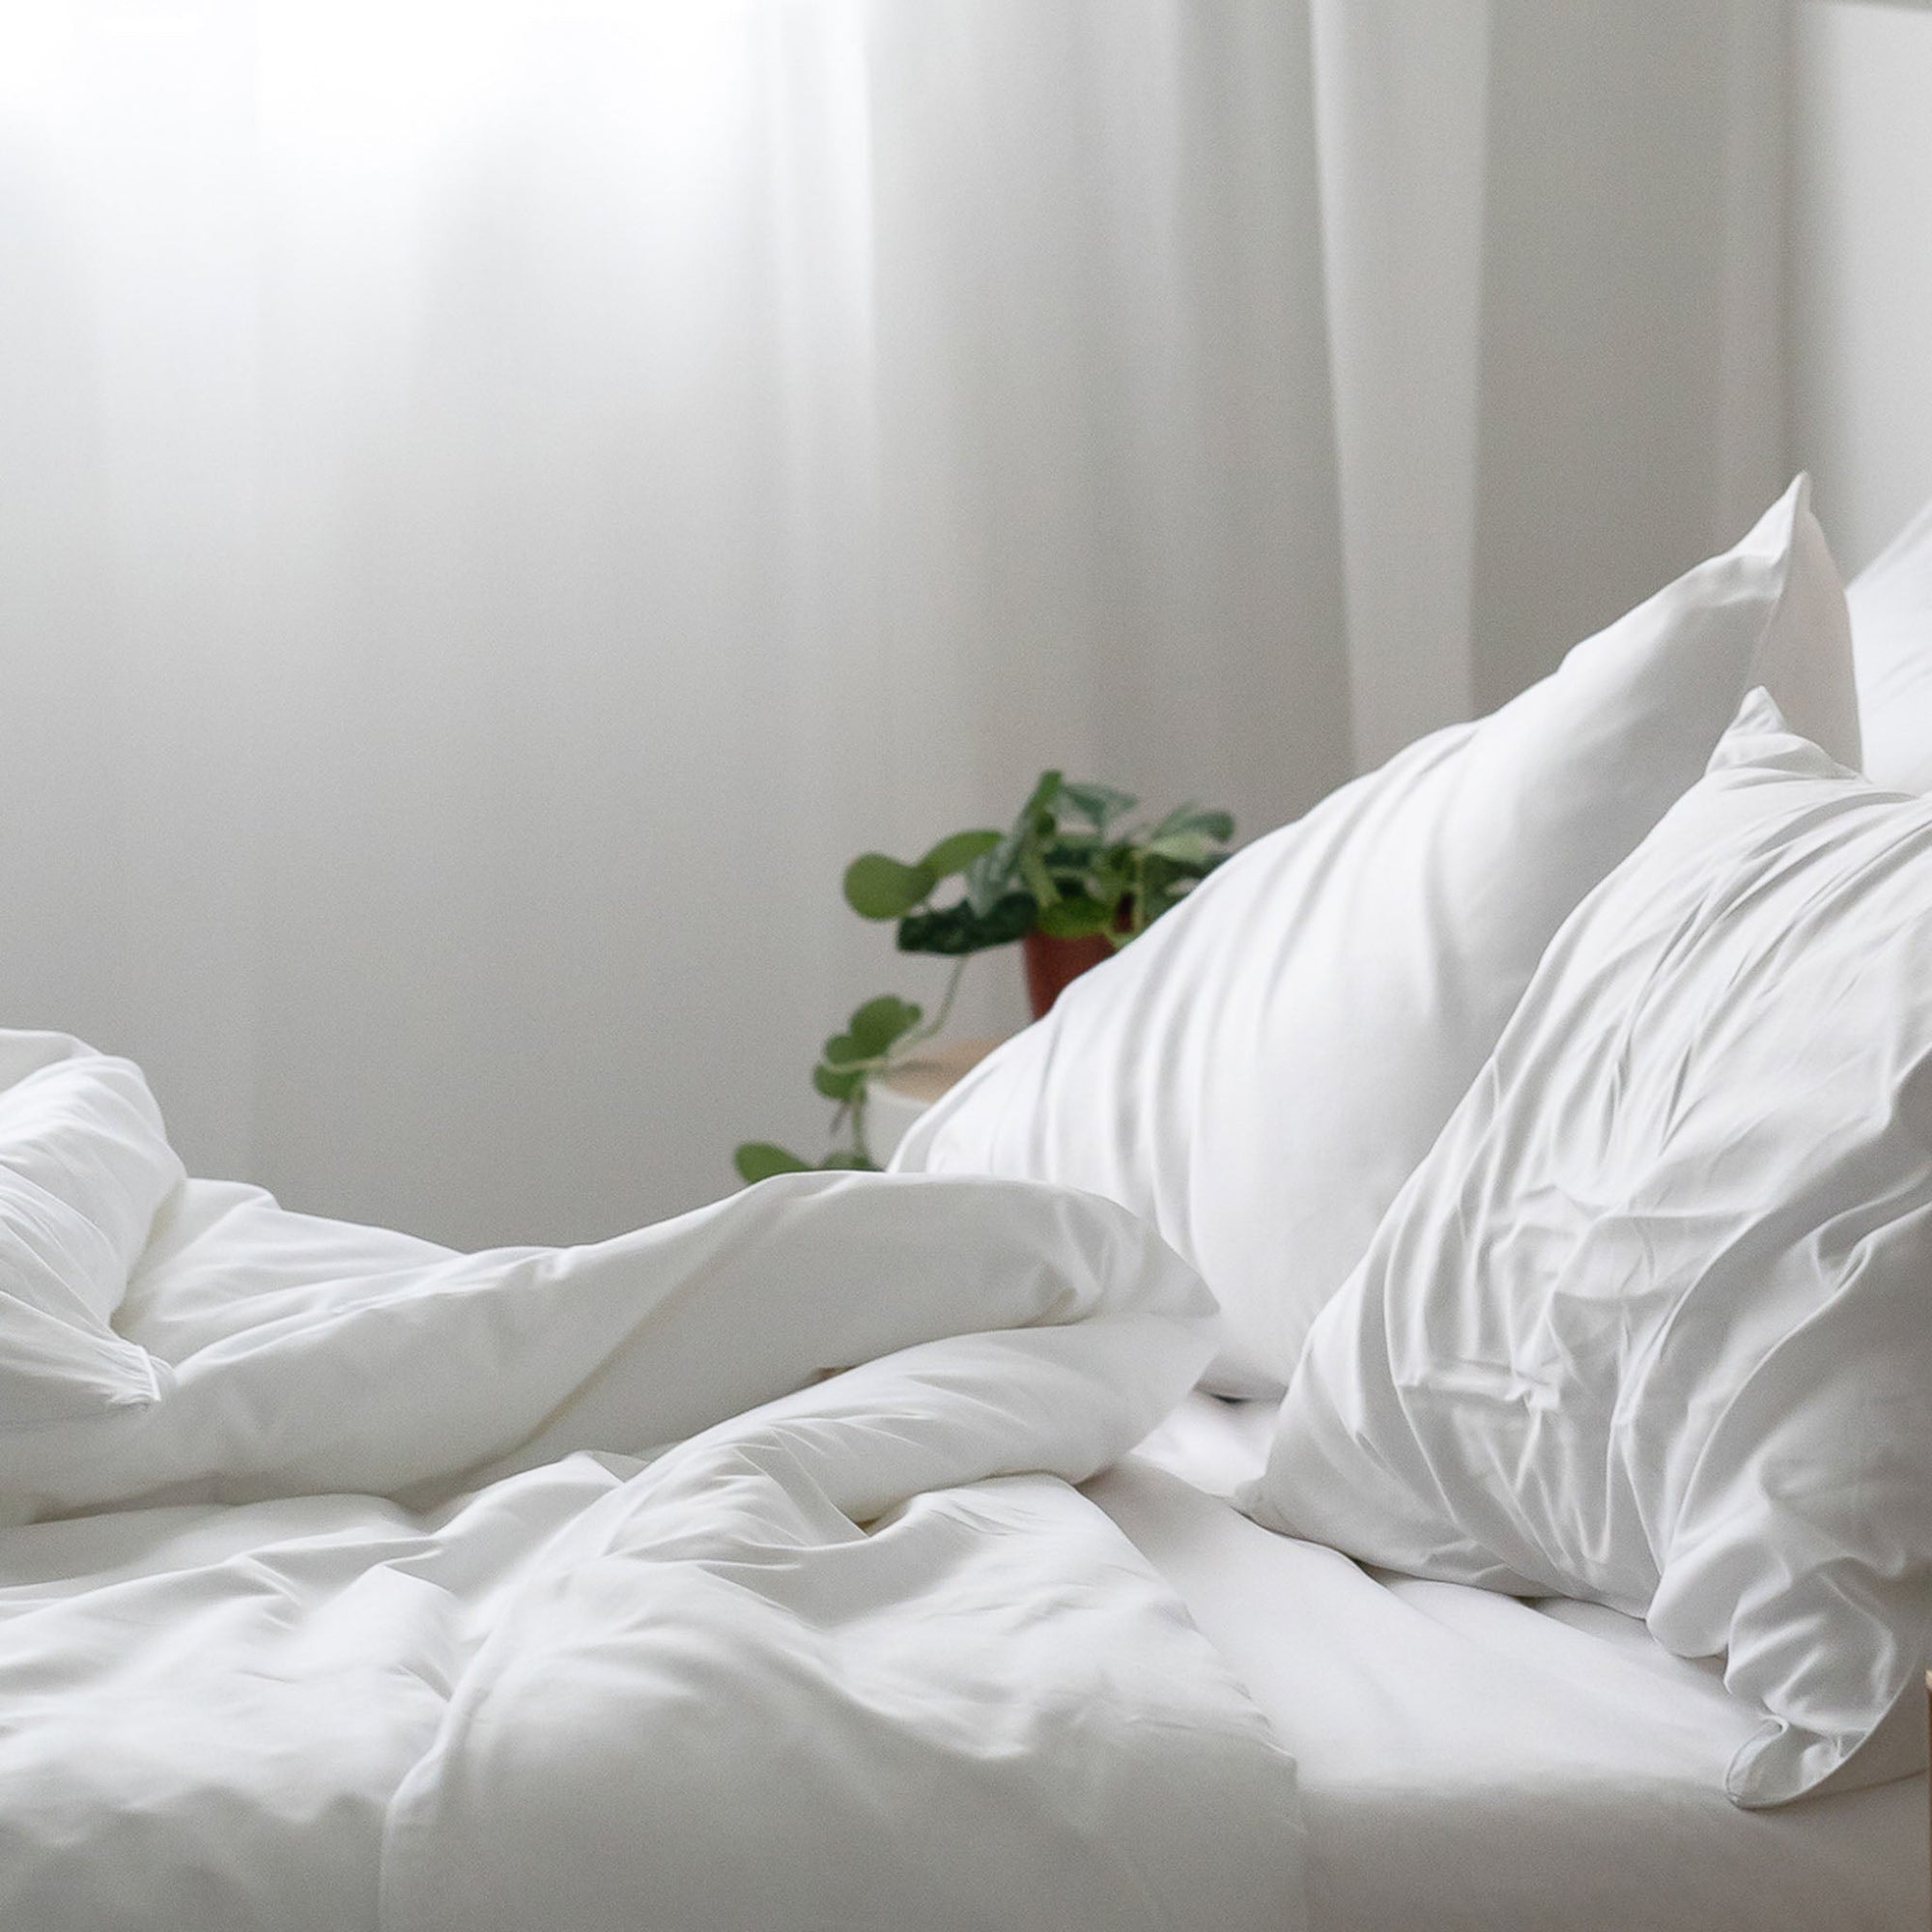 White Cotton Bed Sheets Classic Set with Cotton Fitted Sheet, Cotton Pillow Case, Cotton Duvet Cover. Buy White Bed Sheets at Weavve Home, Shop Egyptian Cotton Bed Sheets Singapore and Luxury Hotel Sheets. 600 High Thread Count Bed Sheet. 